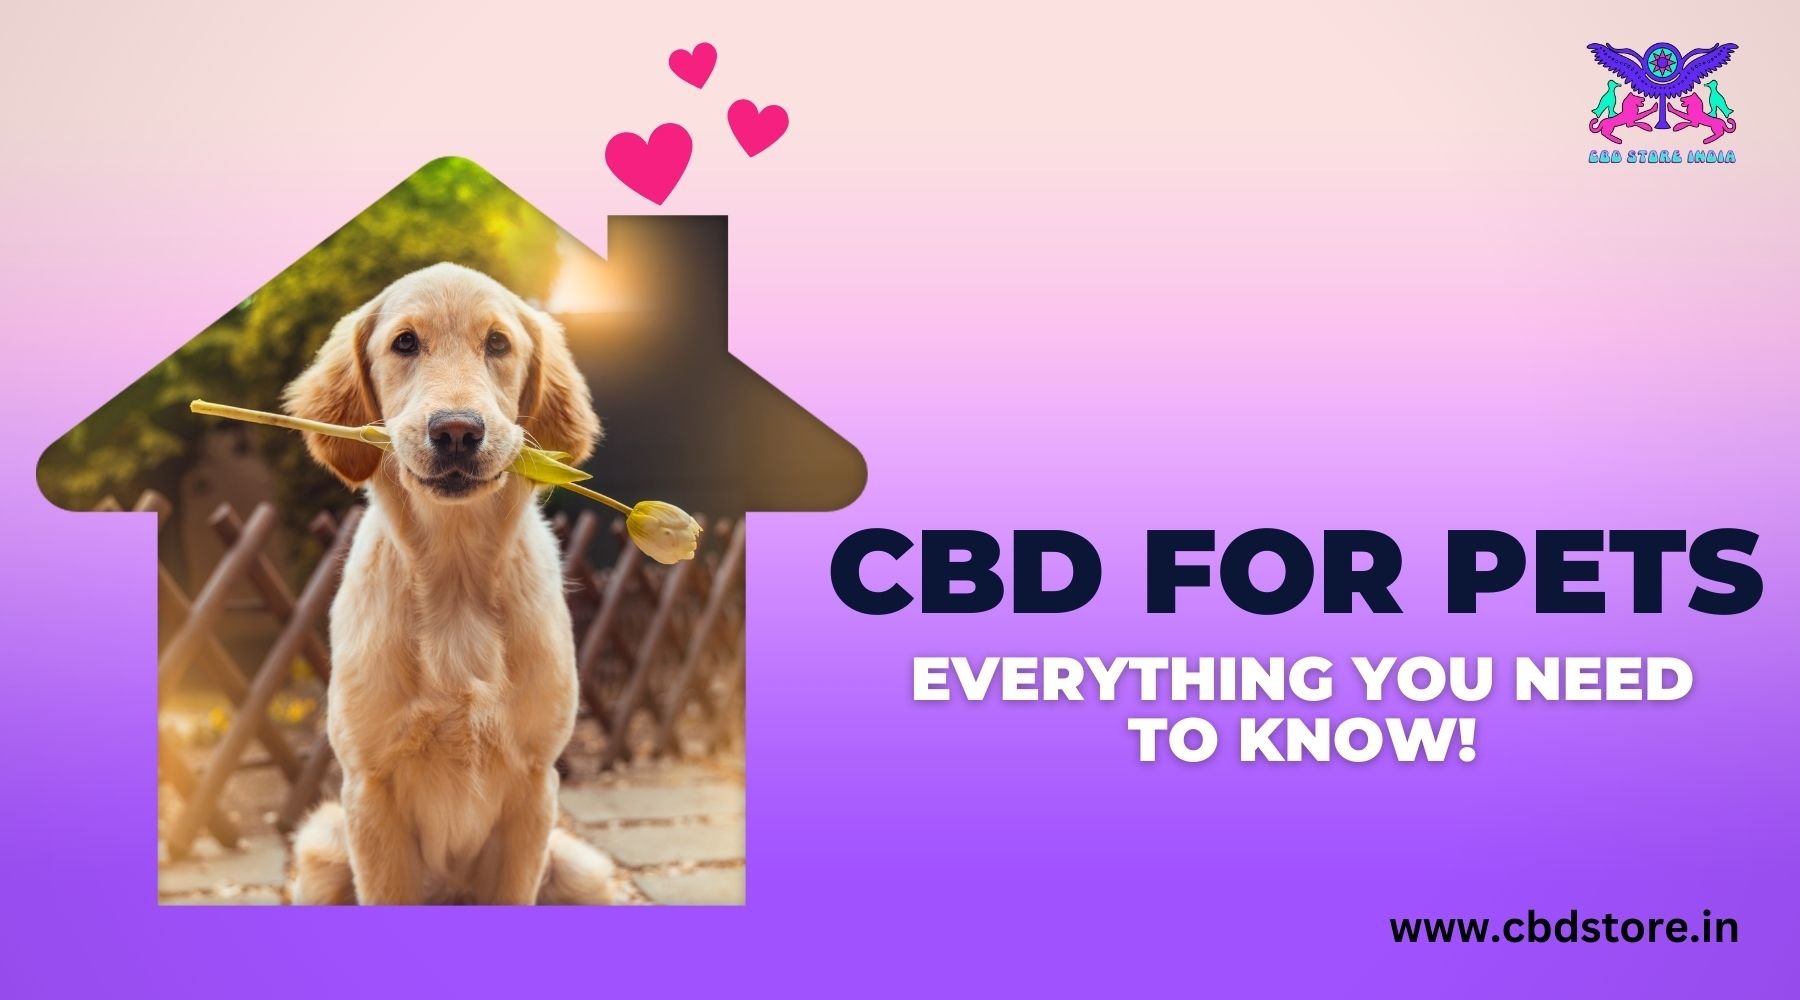 CBD For PETS: Everything you need to know! - CBD Store India